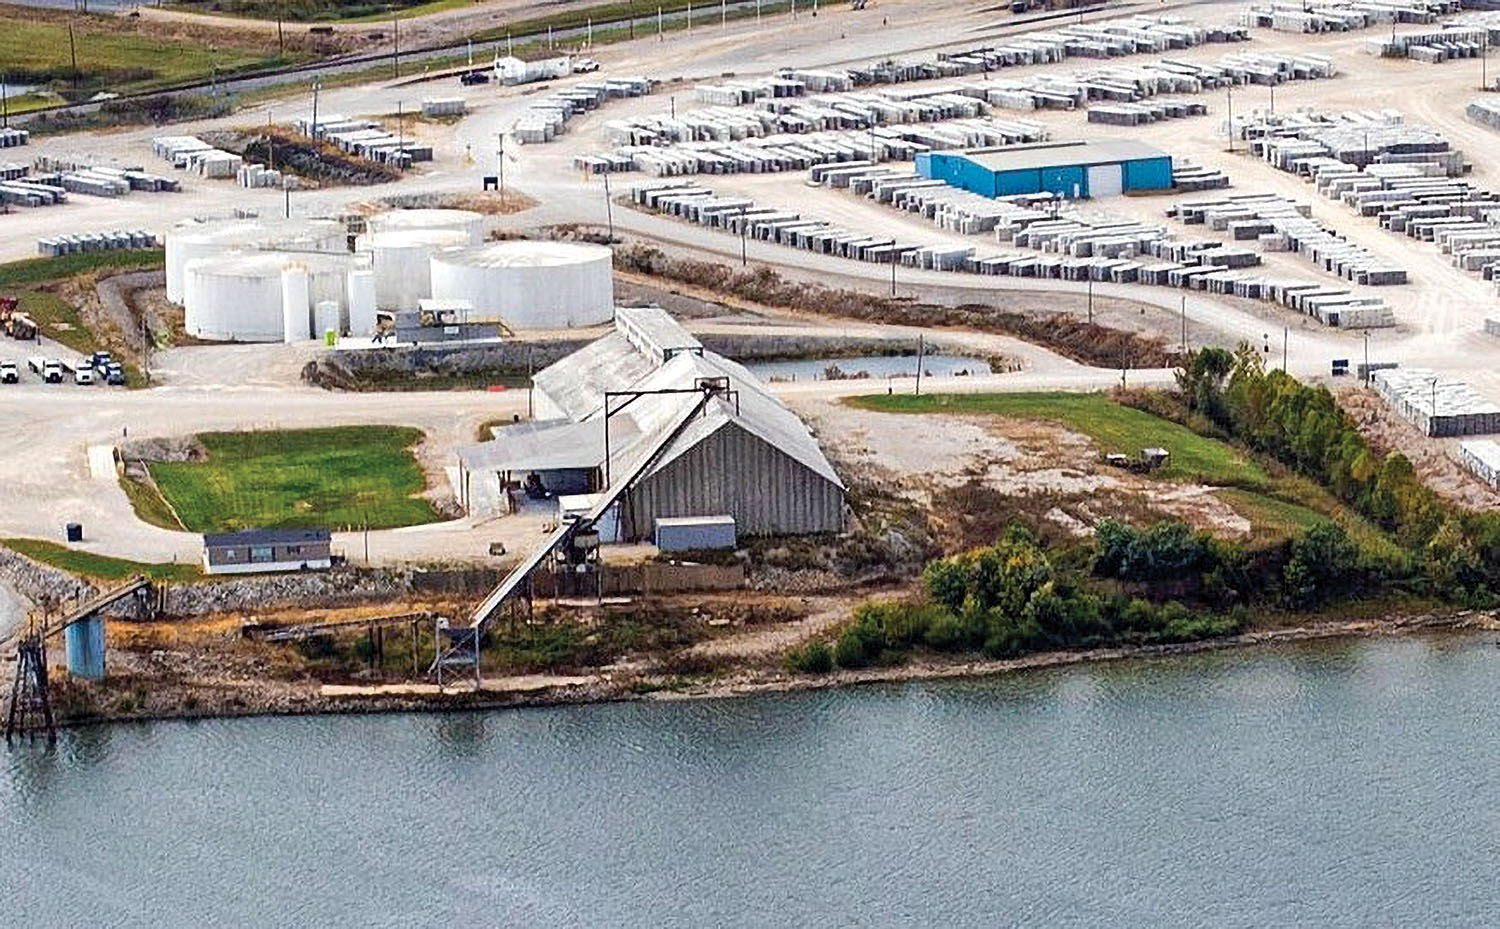 The Owensboro Riverport Authority purchased 7.8 acres of riverfront property containing a 20,000-ton capacity bulk warehouse in January. (Photo courtesy of the Owensboro Riverport Authority)